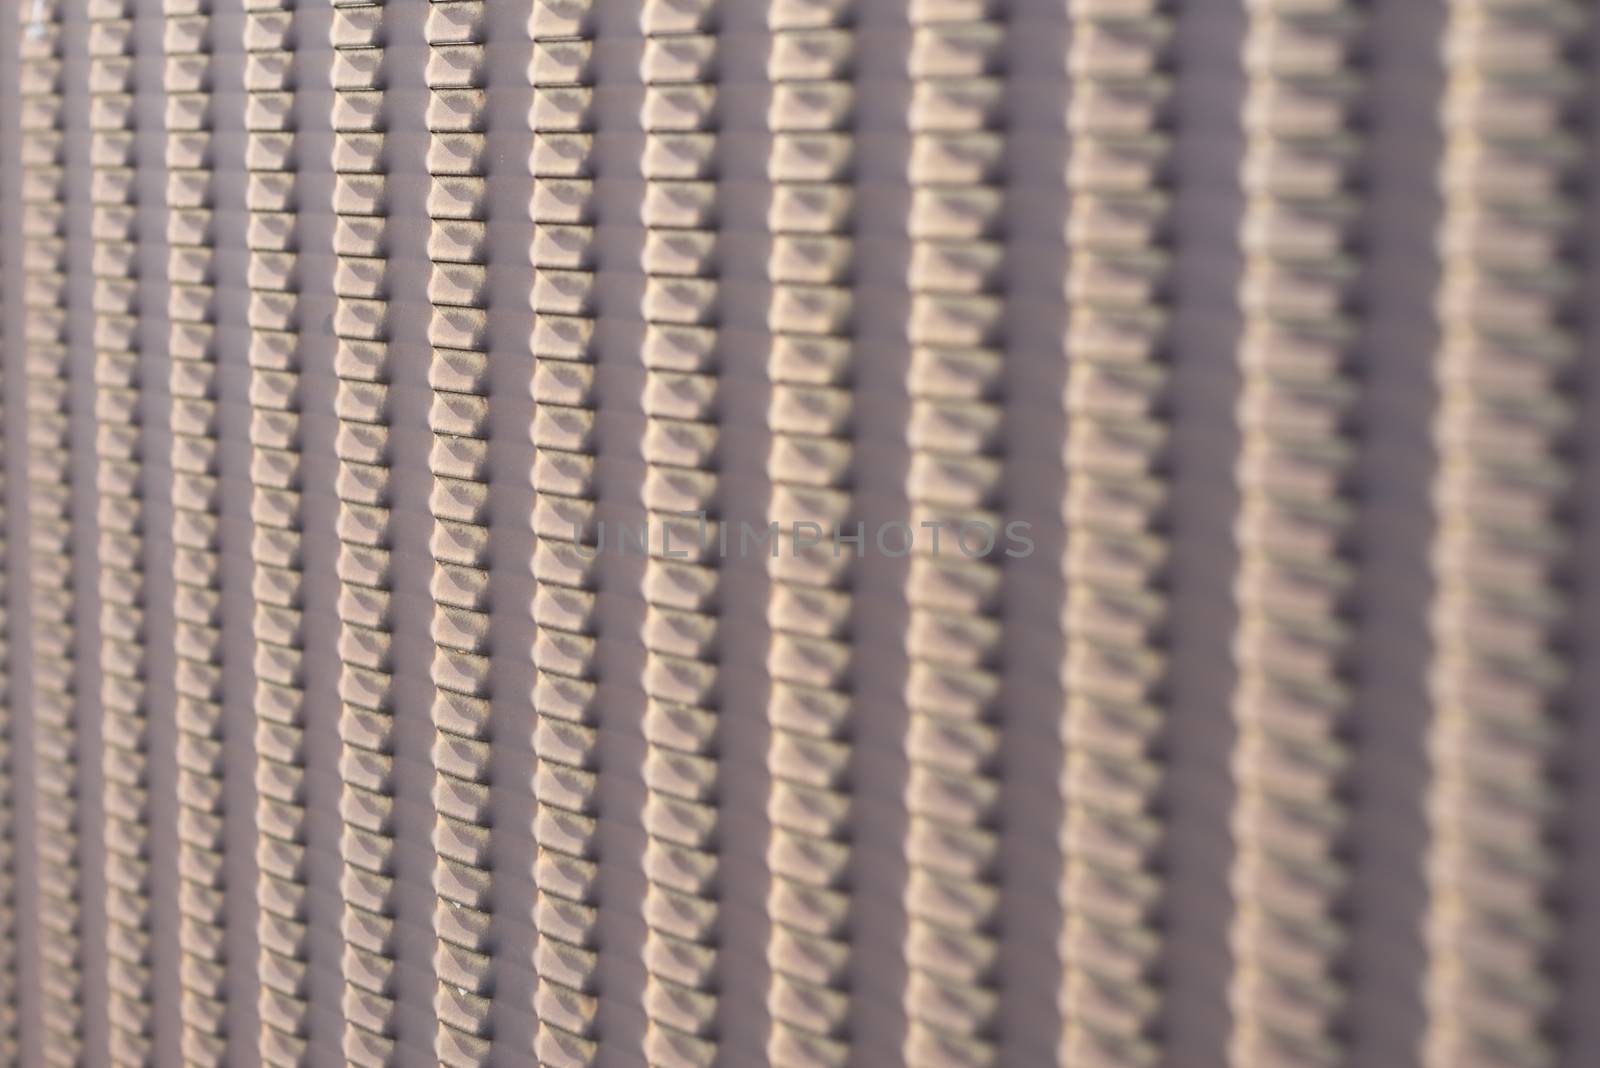 An abstract shot of a brown bumpy metal fence.